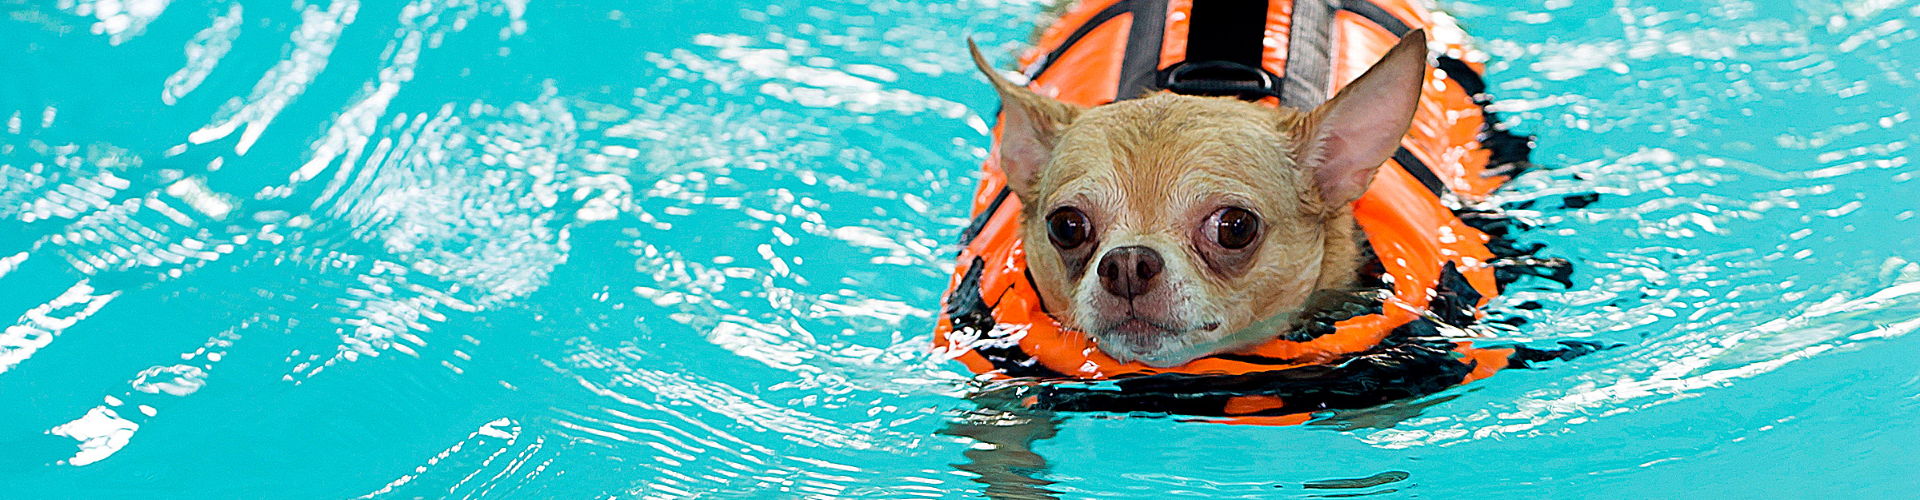 small dog wearing a life jacket in a pool of water